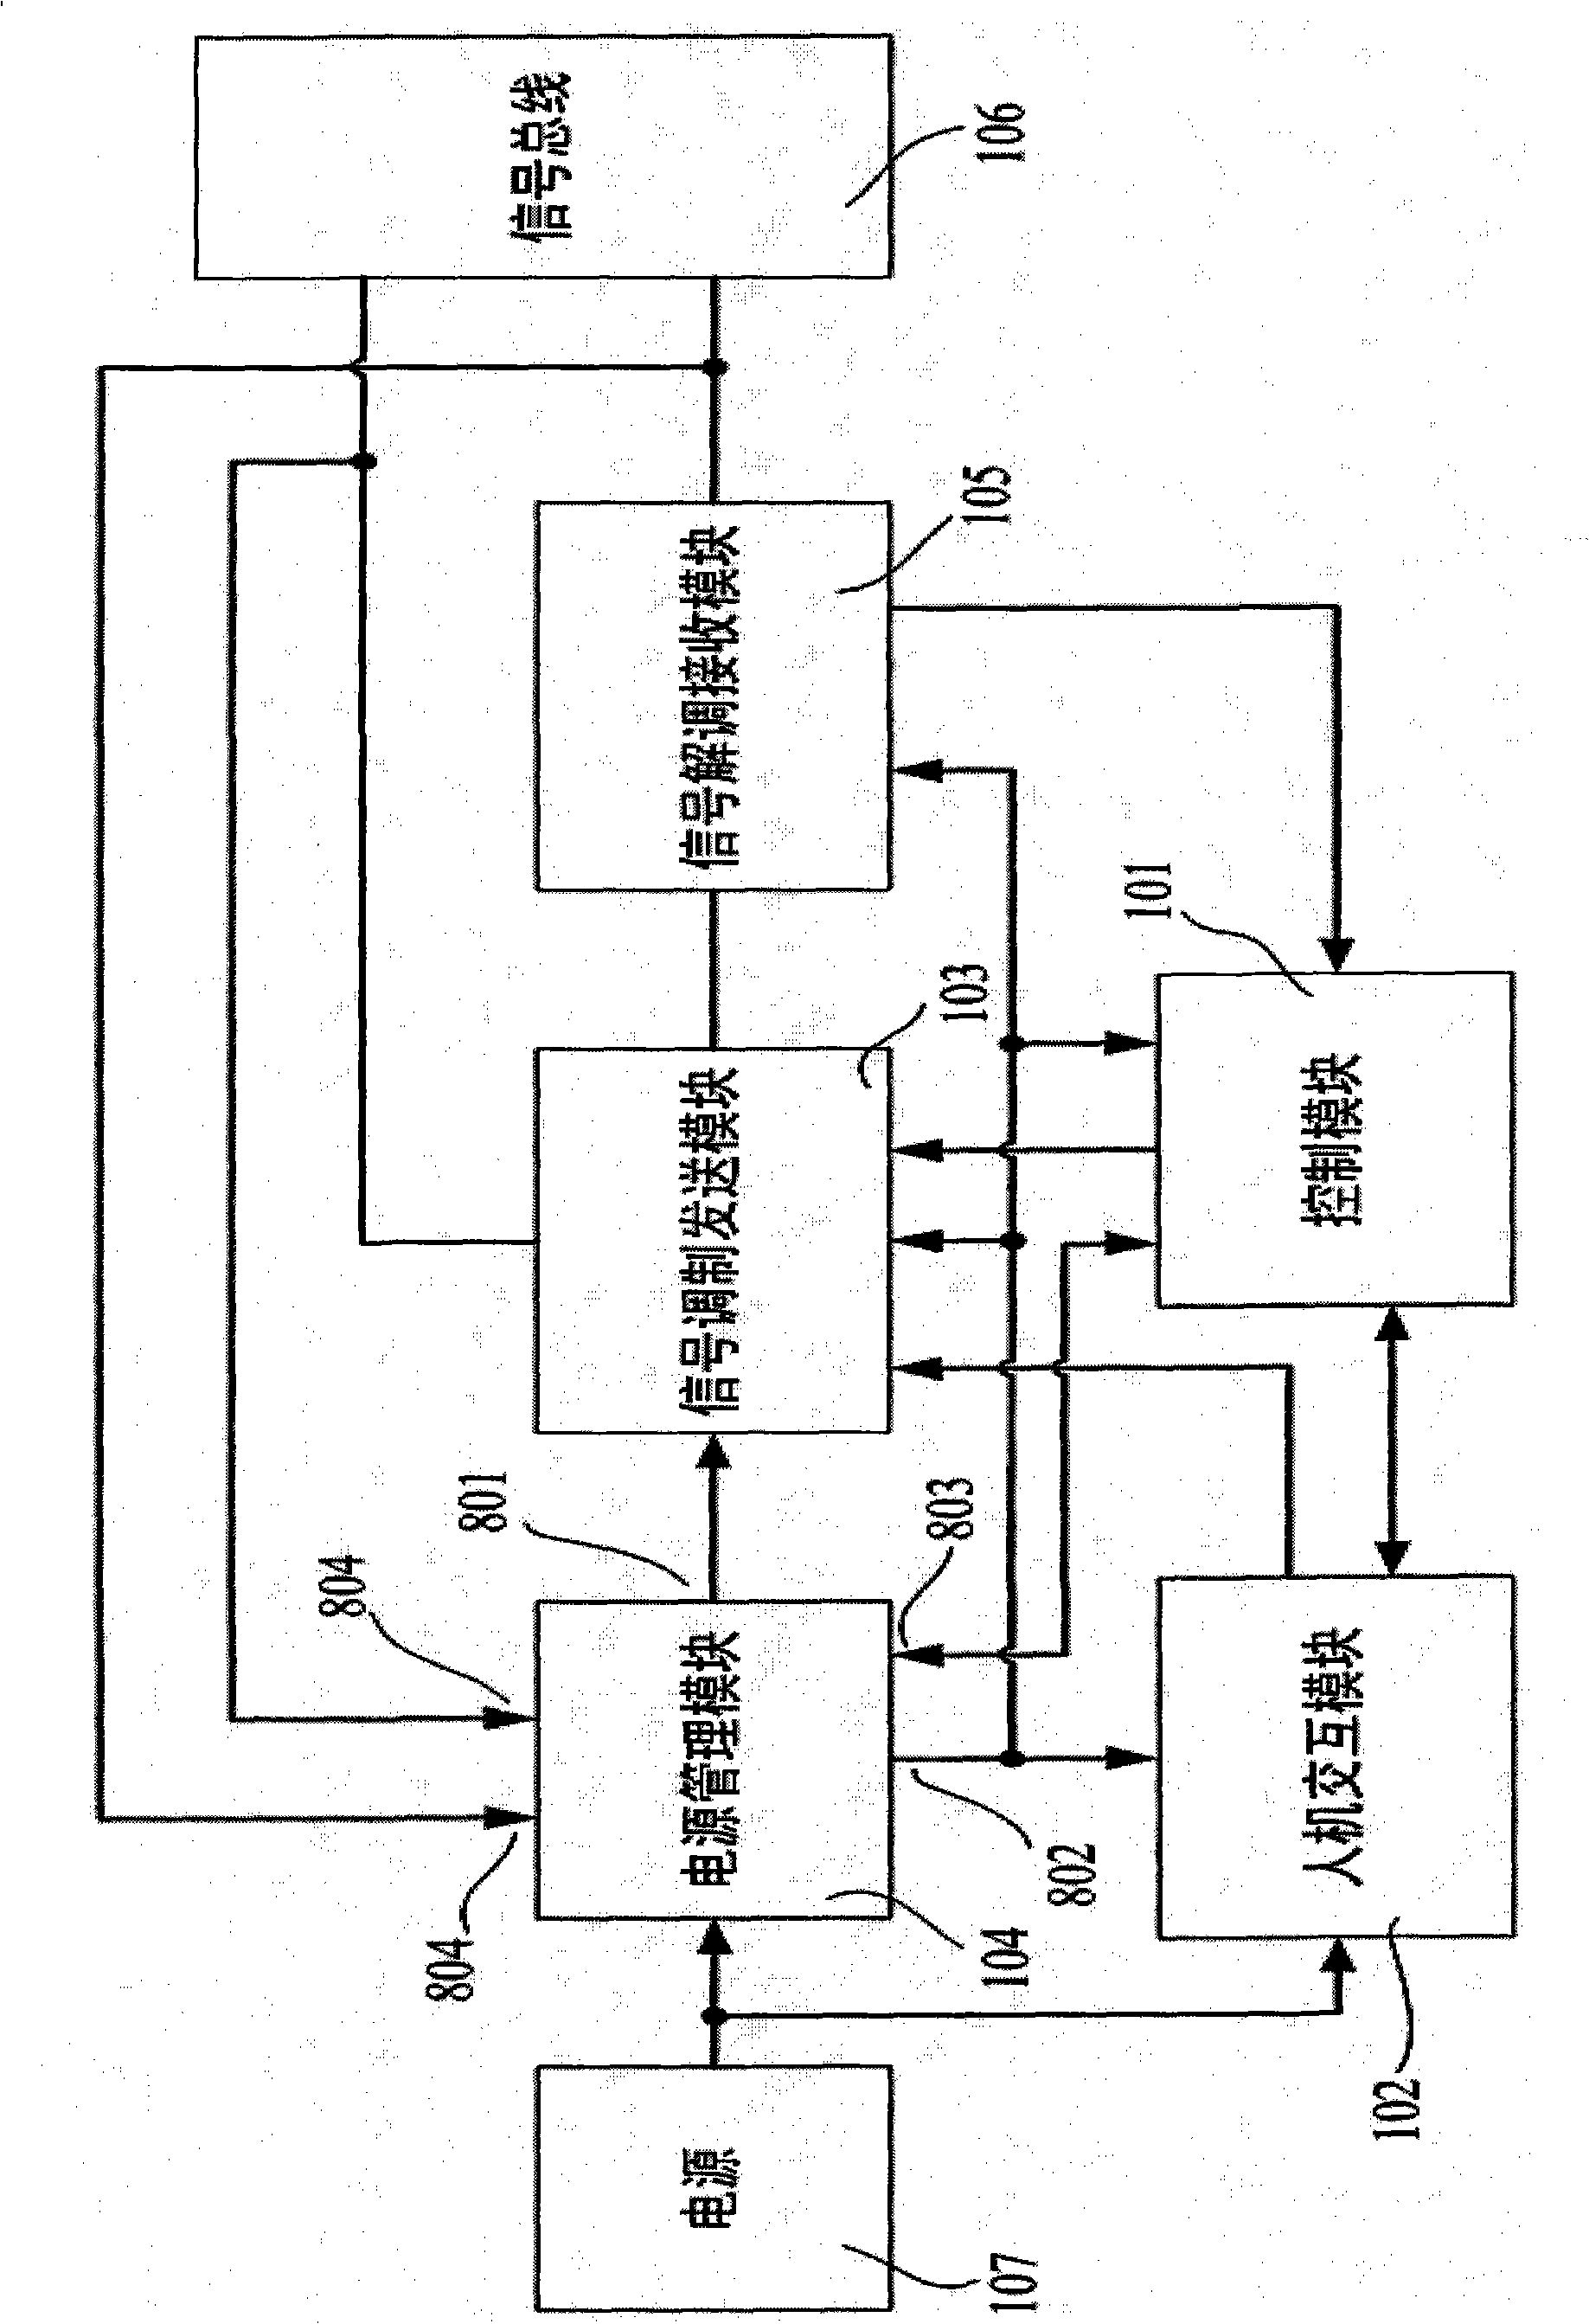 Detonating device and main control process flow thereof